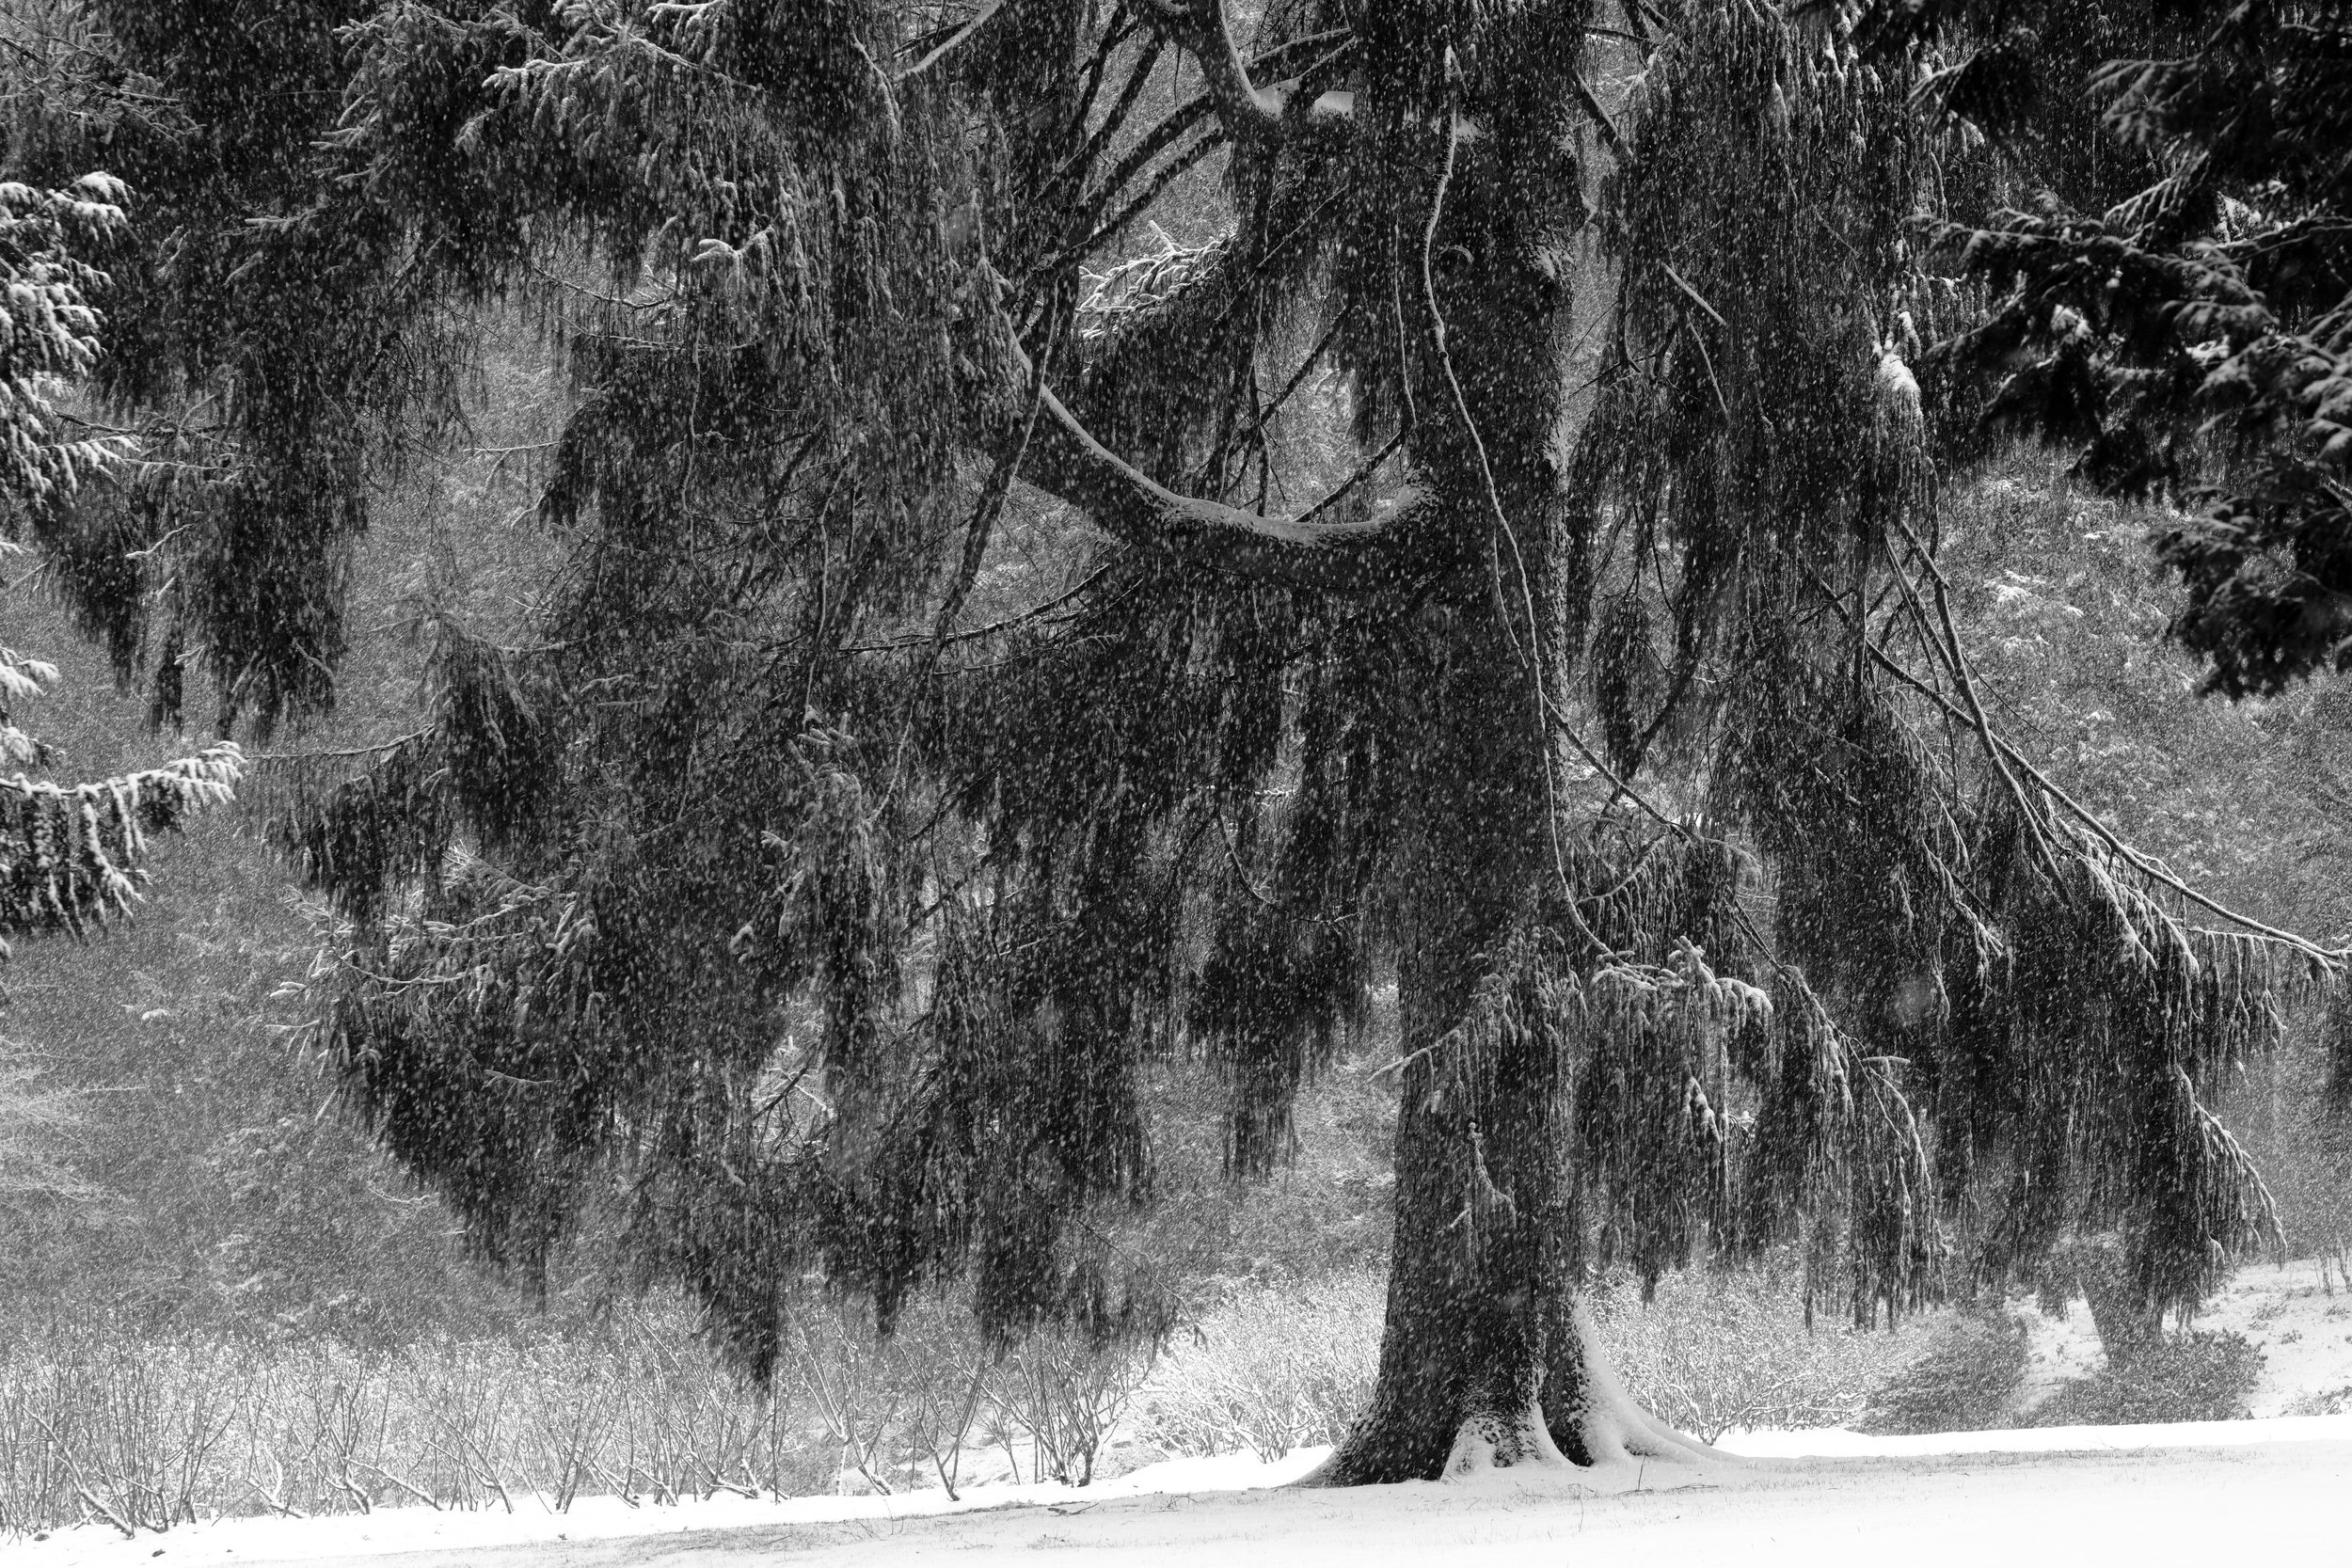 A snow storm hits Stanley Park in Vancouver. A large tree in the park